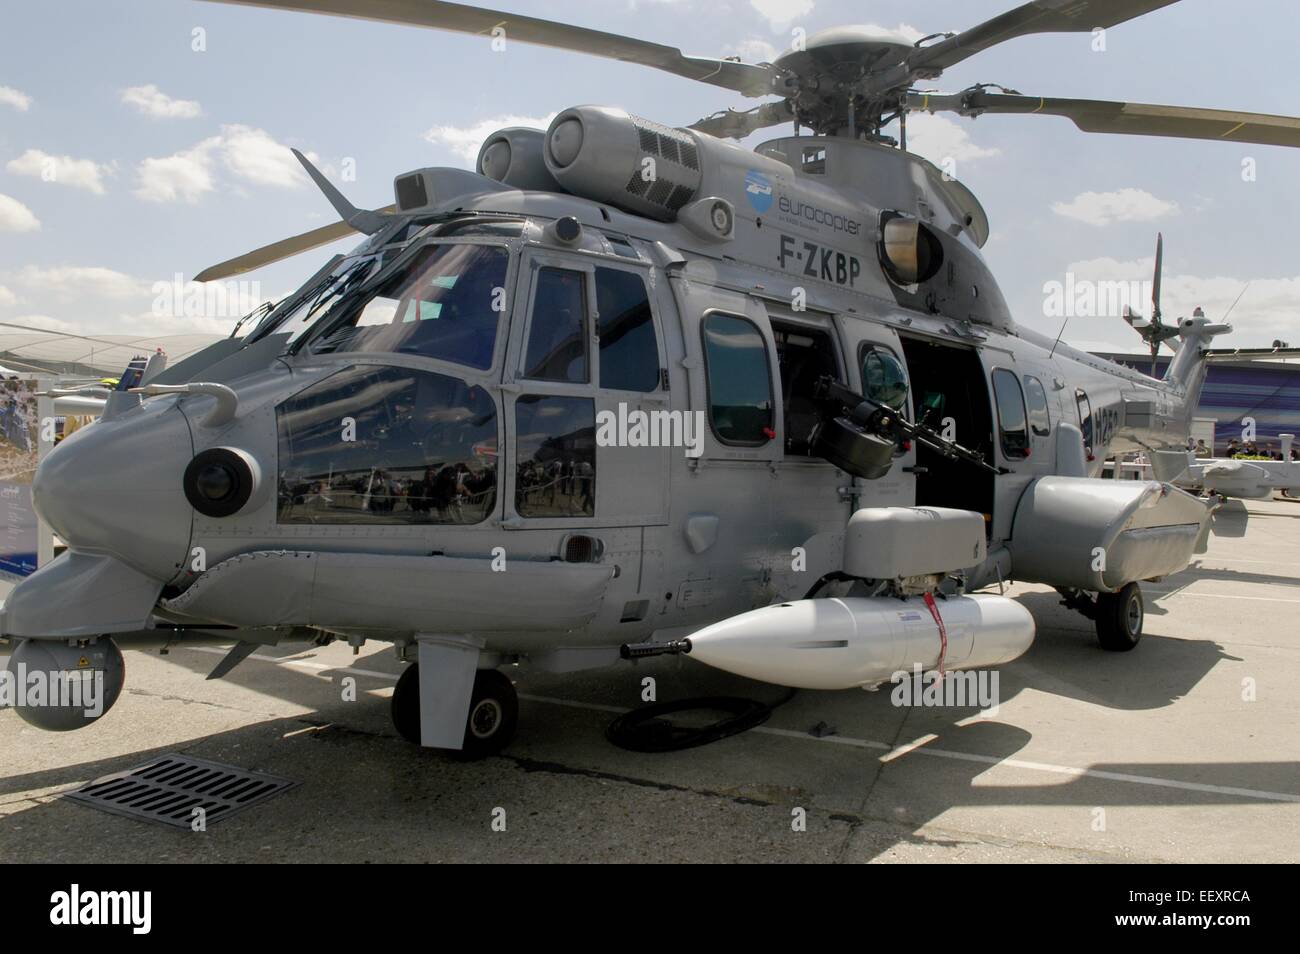 Military helicopter Eurocopter Super Puma Stock Photo - Alamy